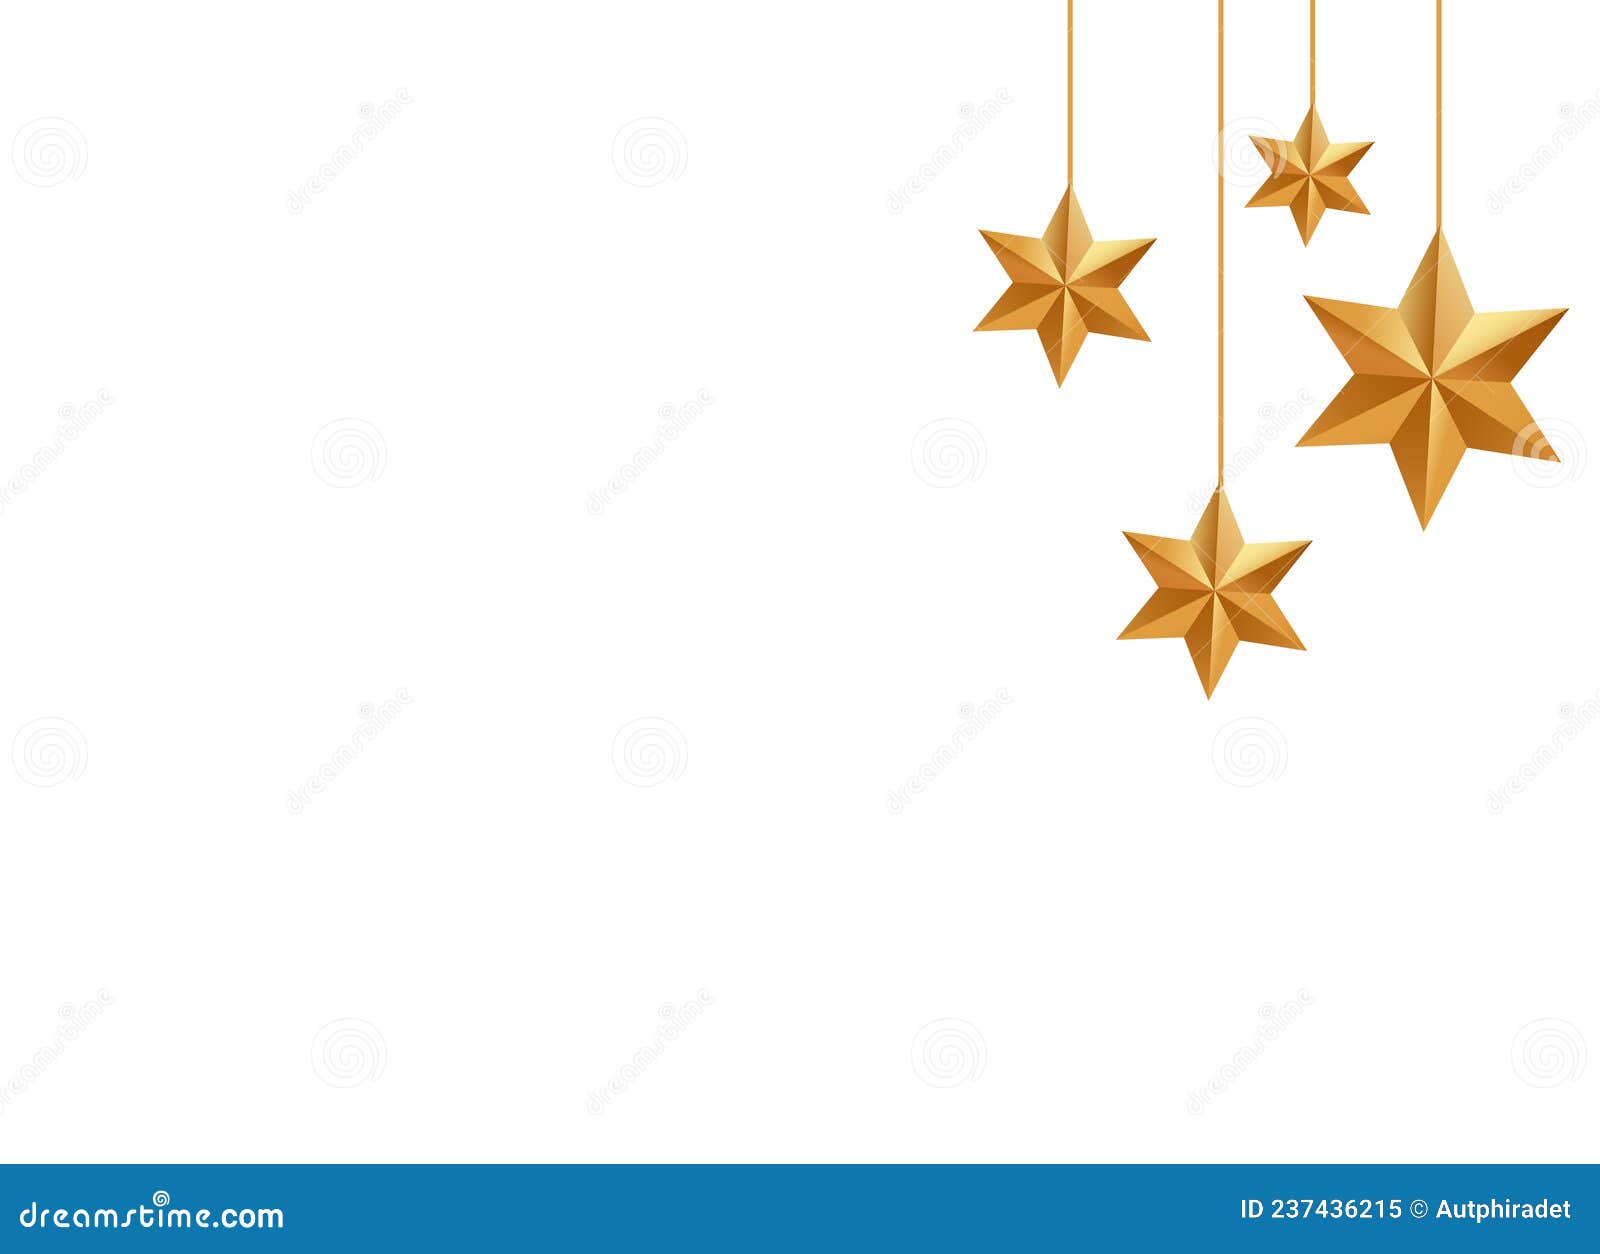 Gold Glitter Particles Star Hanging from Top Isolated on Png or Transparent  Background. Graphic Resources for Christmas, New Stock Vector -  Illustration of holiday, ball: 237436215